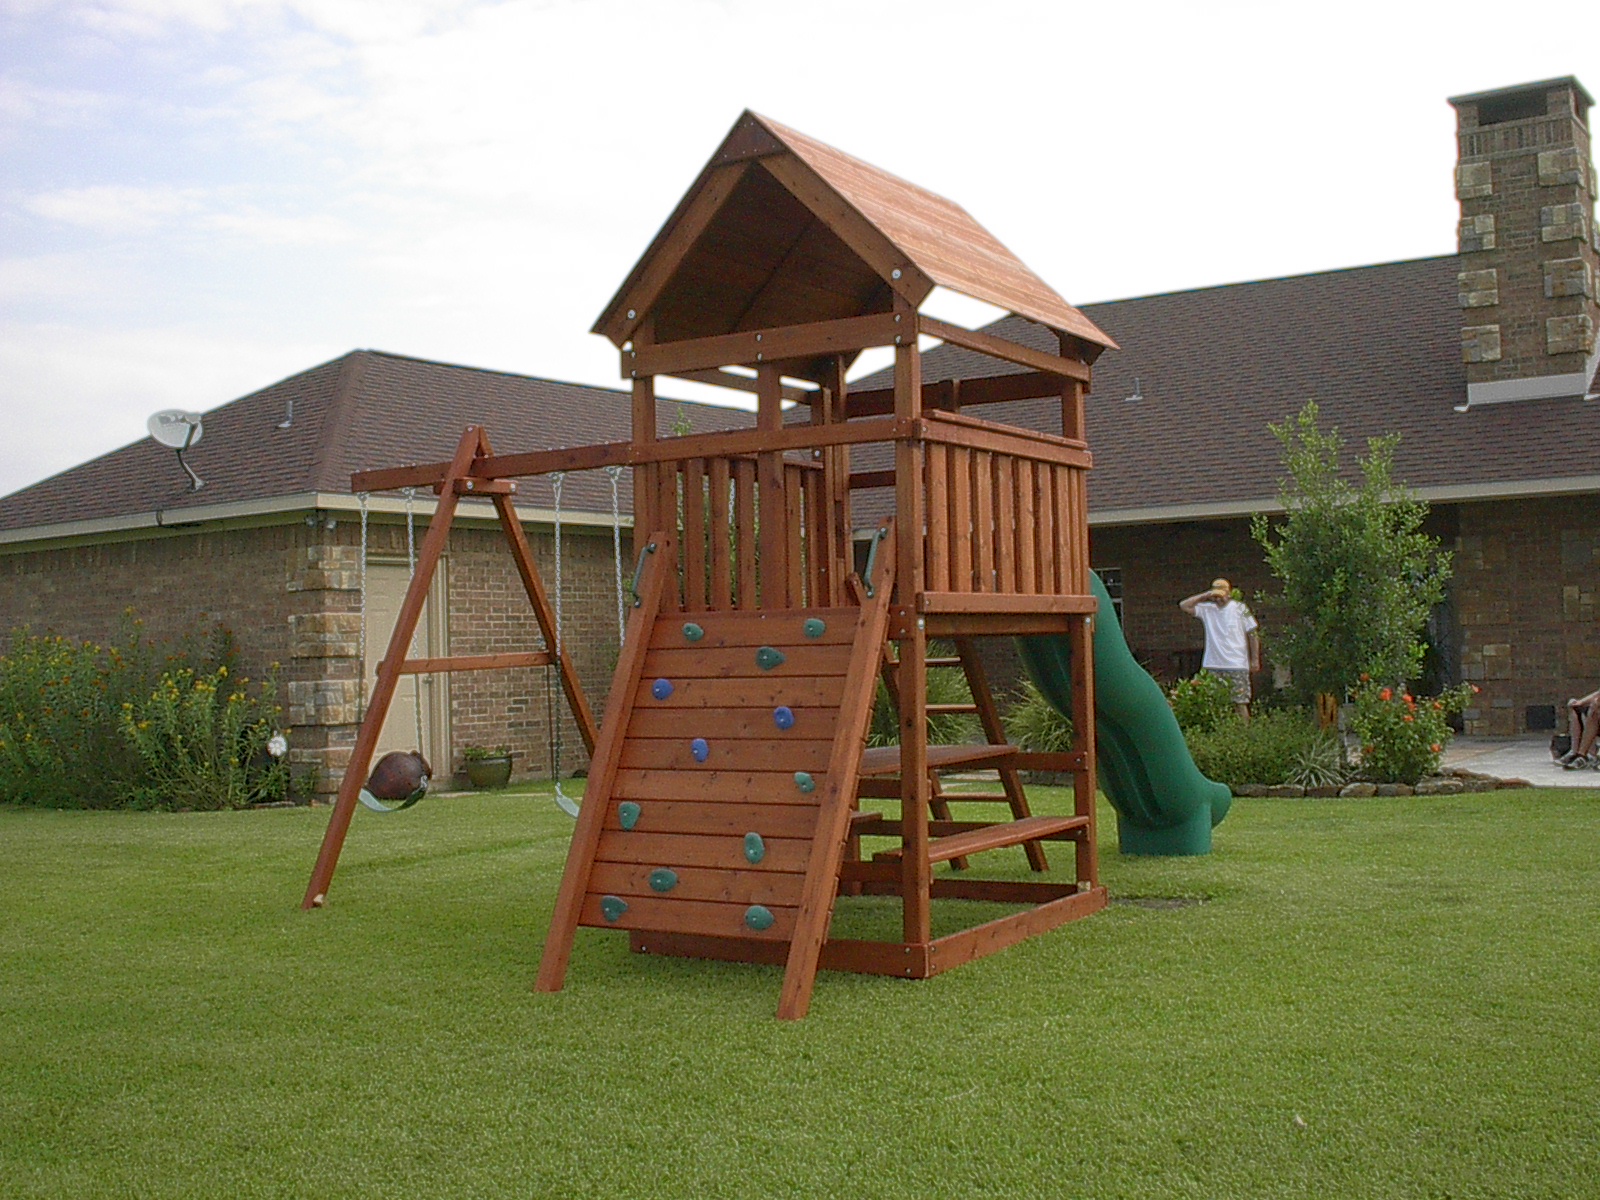 Triton Playset DIY Wood Fort and Swingset Add-on Plans